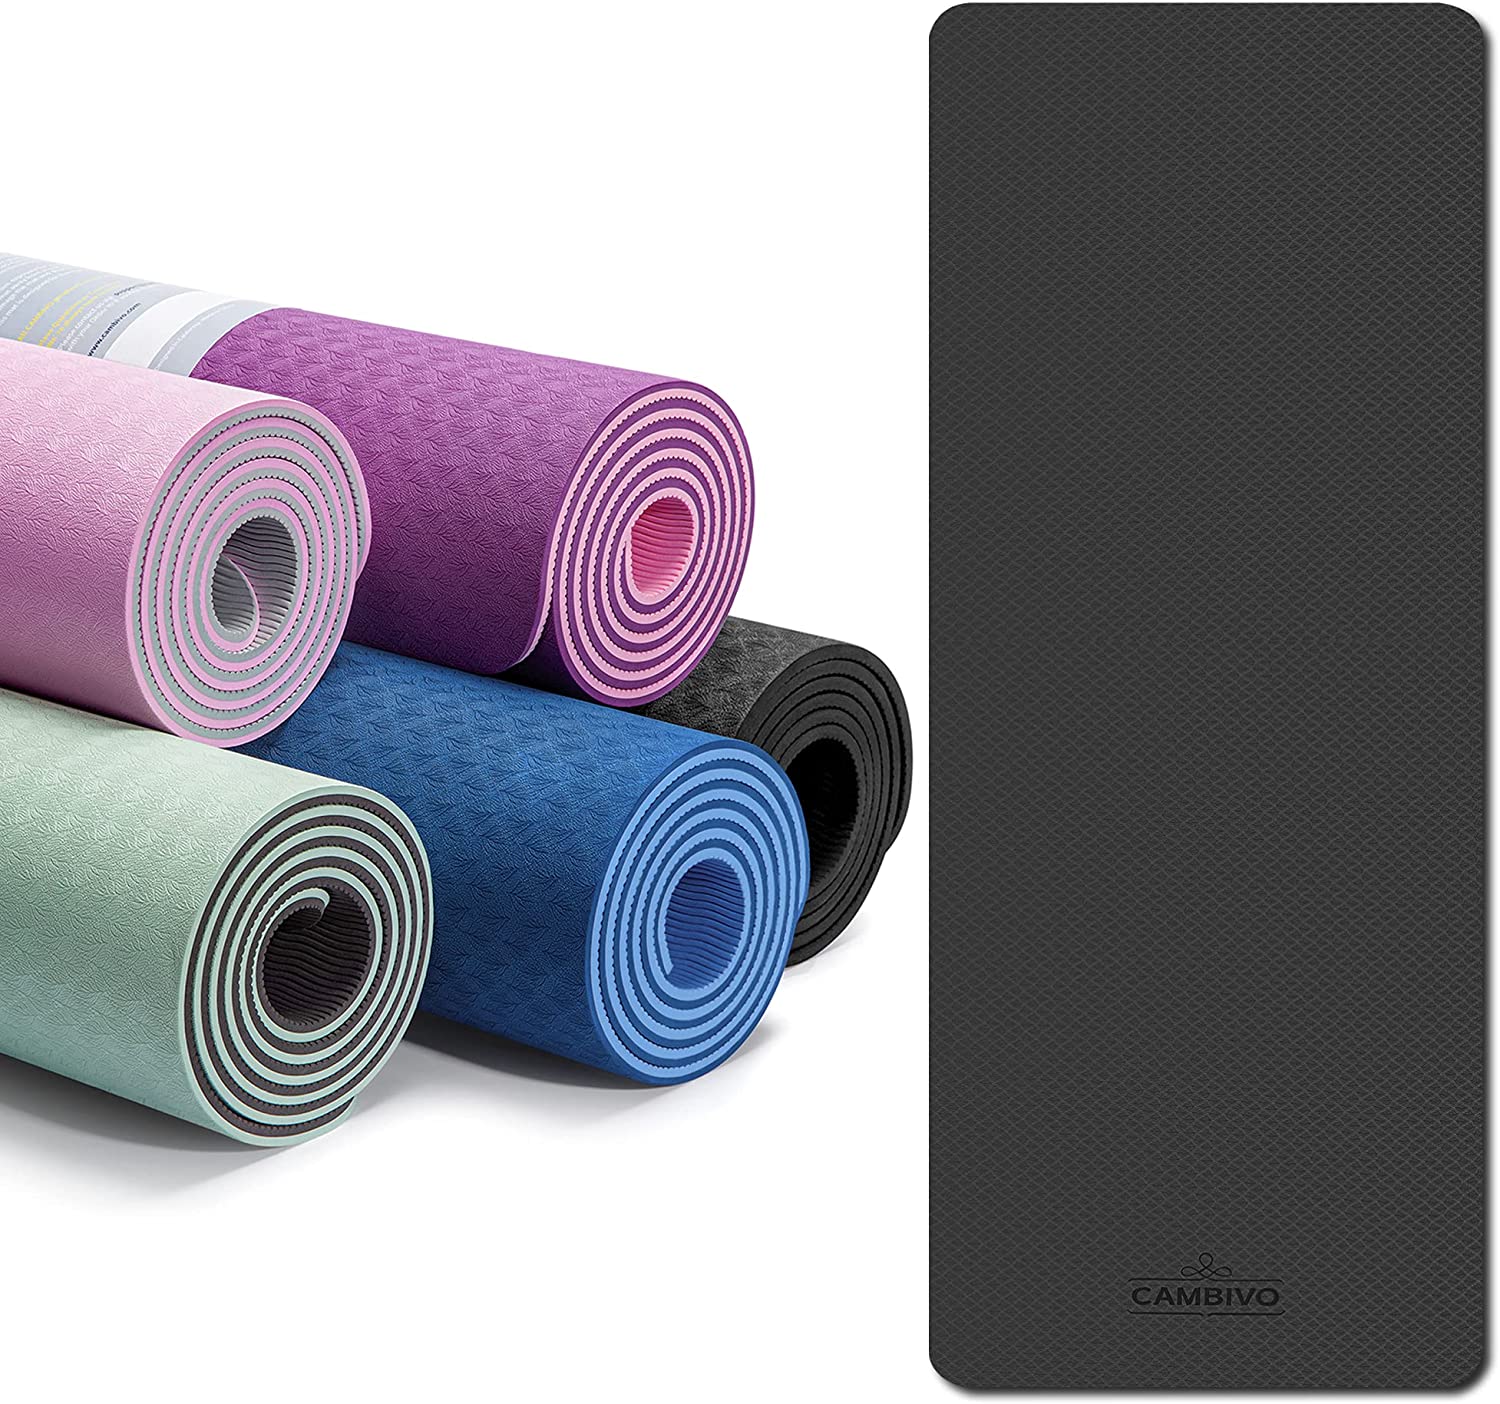 BEAUTYOVO 6' x 4' Large Yoga Mat, 1/3| 1/4 Inch Extra Thick Yoga Mat  Double-Sided Non Slip, Professional TPE| PVC Yoga Mats for Women Men, 24  Sq.Ft